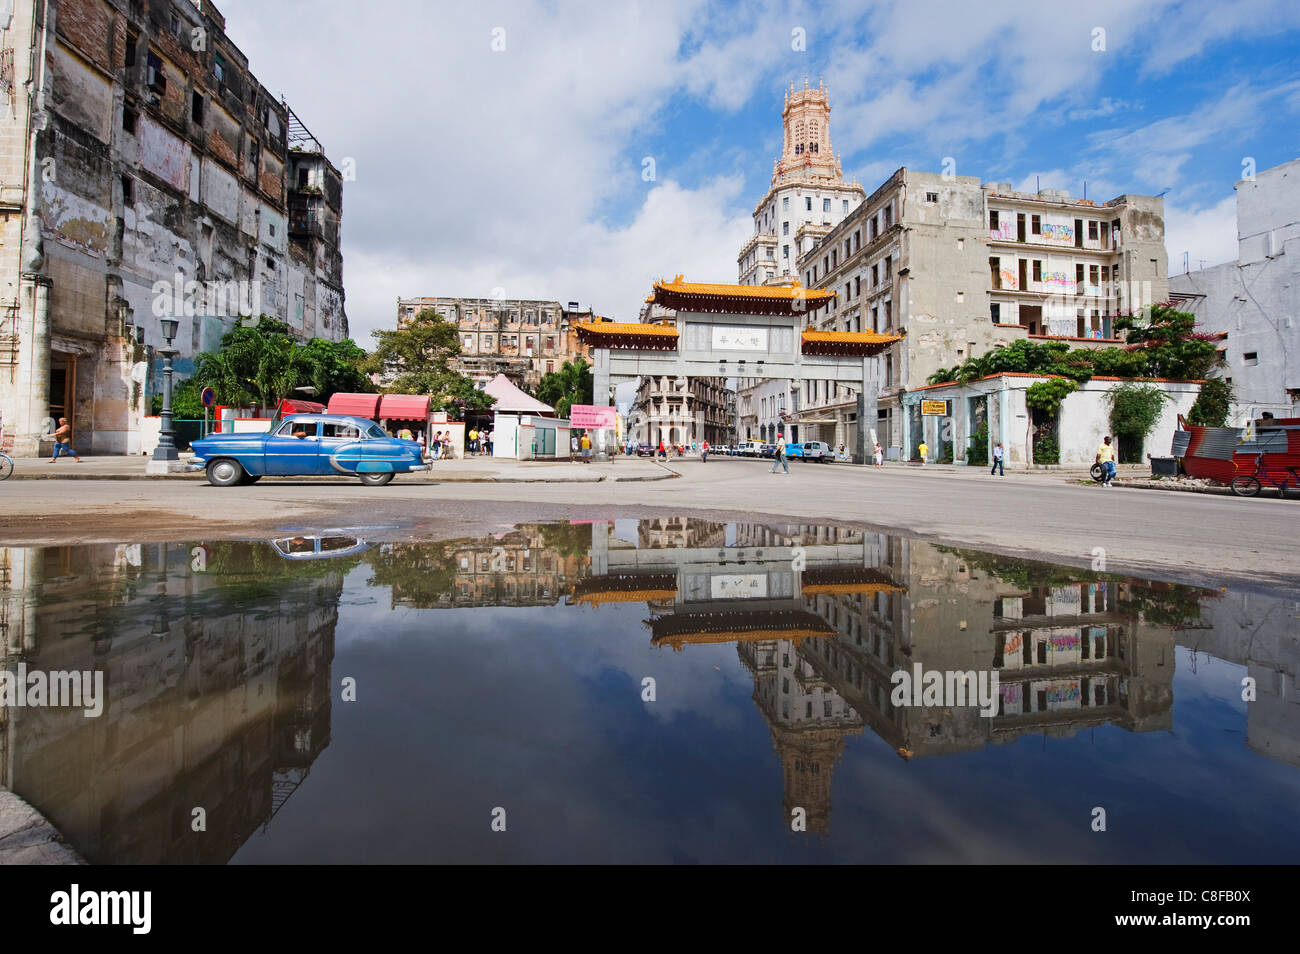 1950s classic American car in Chinatown reflecting in water, Central Havana, Cuba, West Indies, Caribbean, Central America Stock Photo